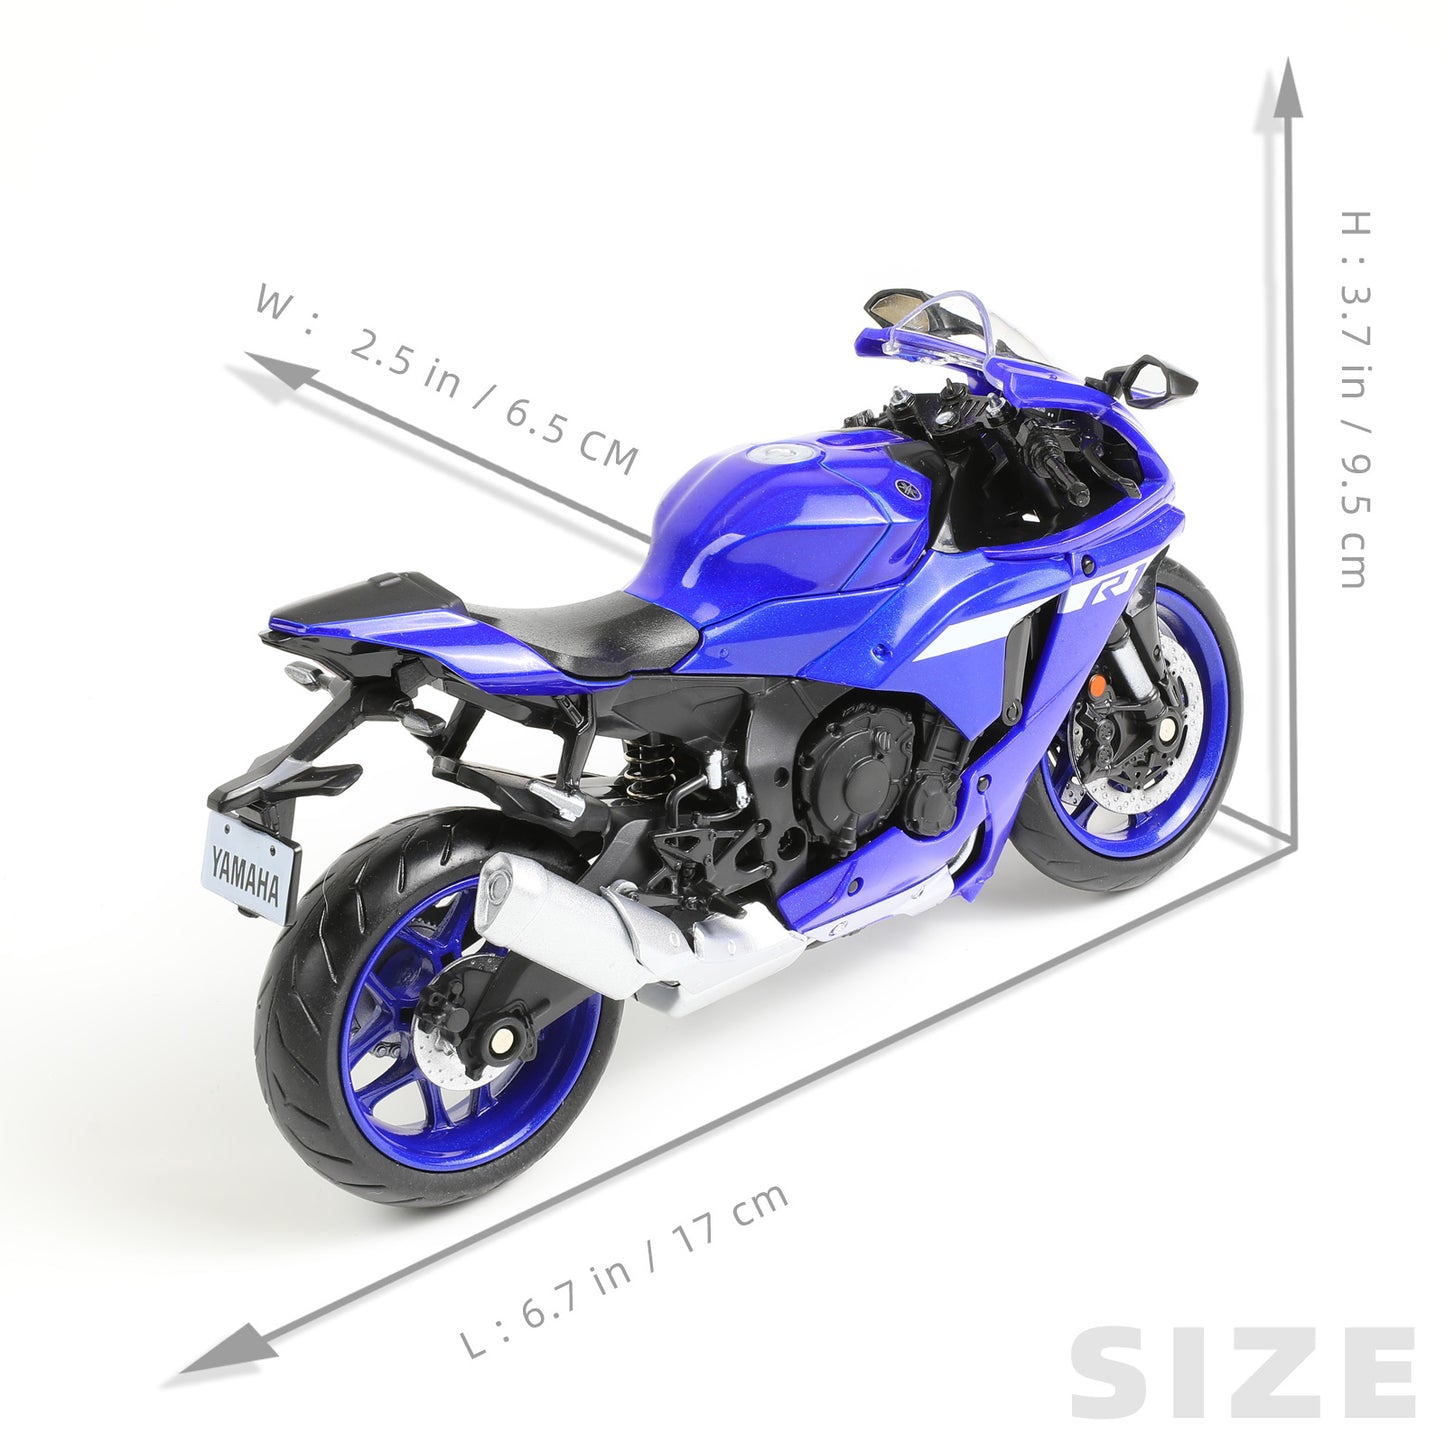 DieCast Motorcycle Model for YAMAHA R1M, Realistic Motorcycle Metal Model, 1:12 Scale Kids Moto Toy or Collection,MAKEDA Pre-Built Toys Gift